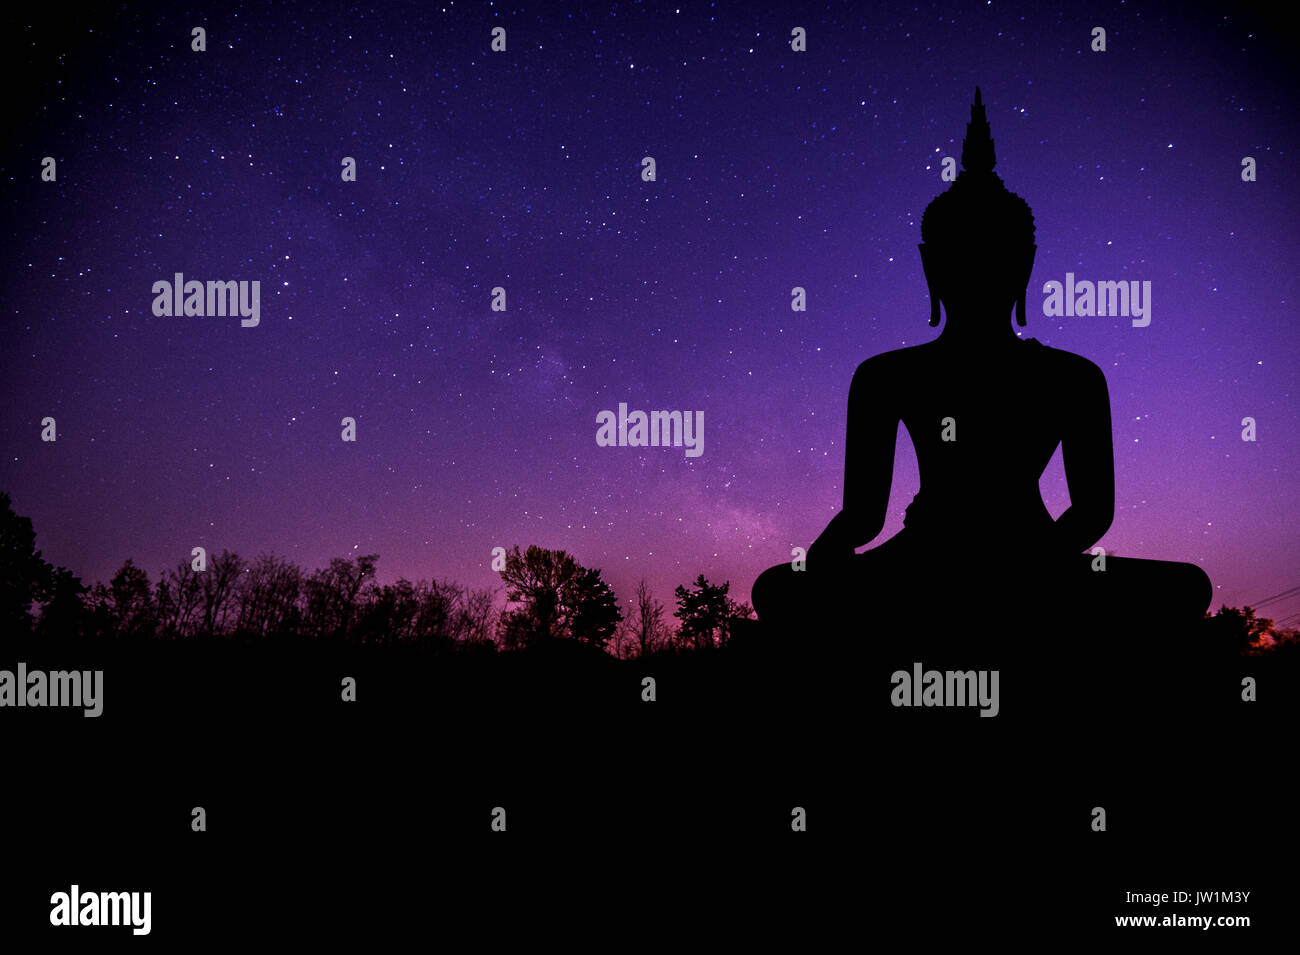 The Milky Way and silhouette of buddha statue. Stock Photo